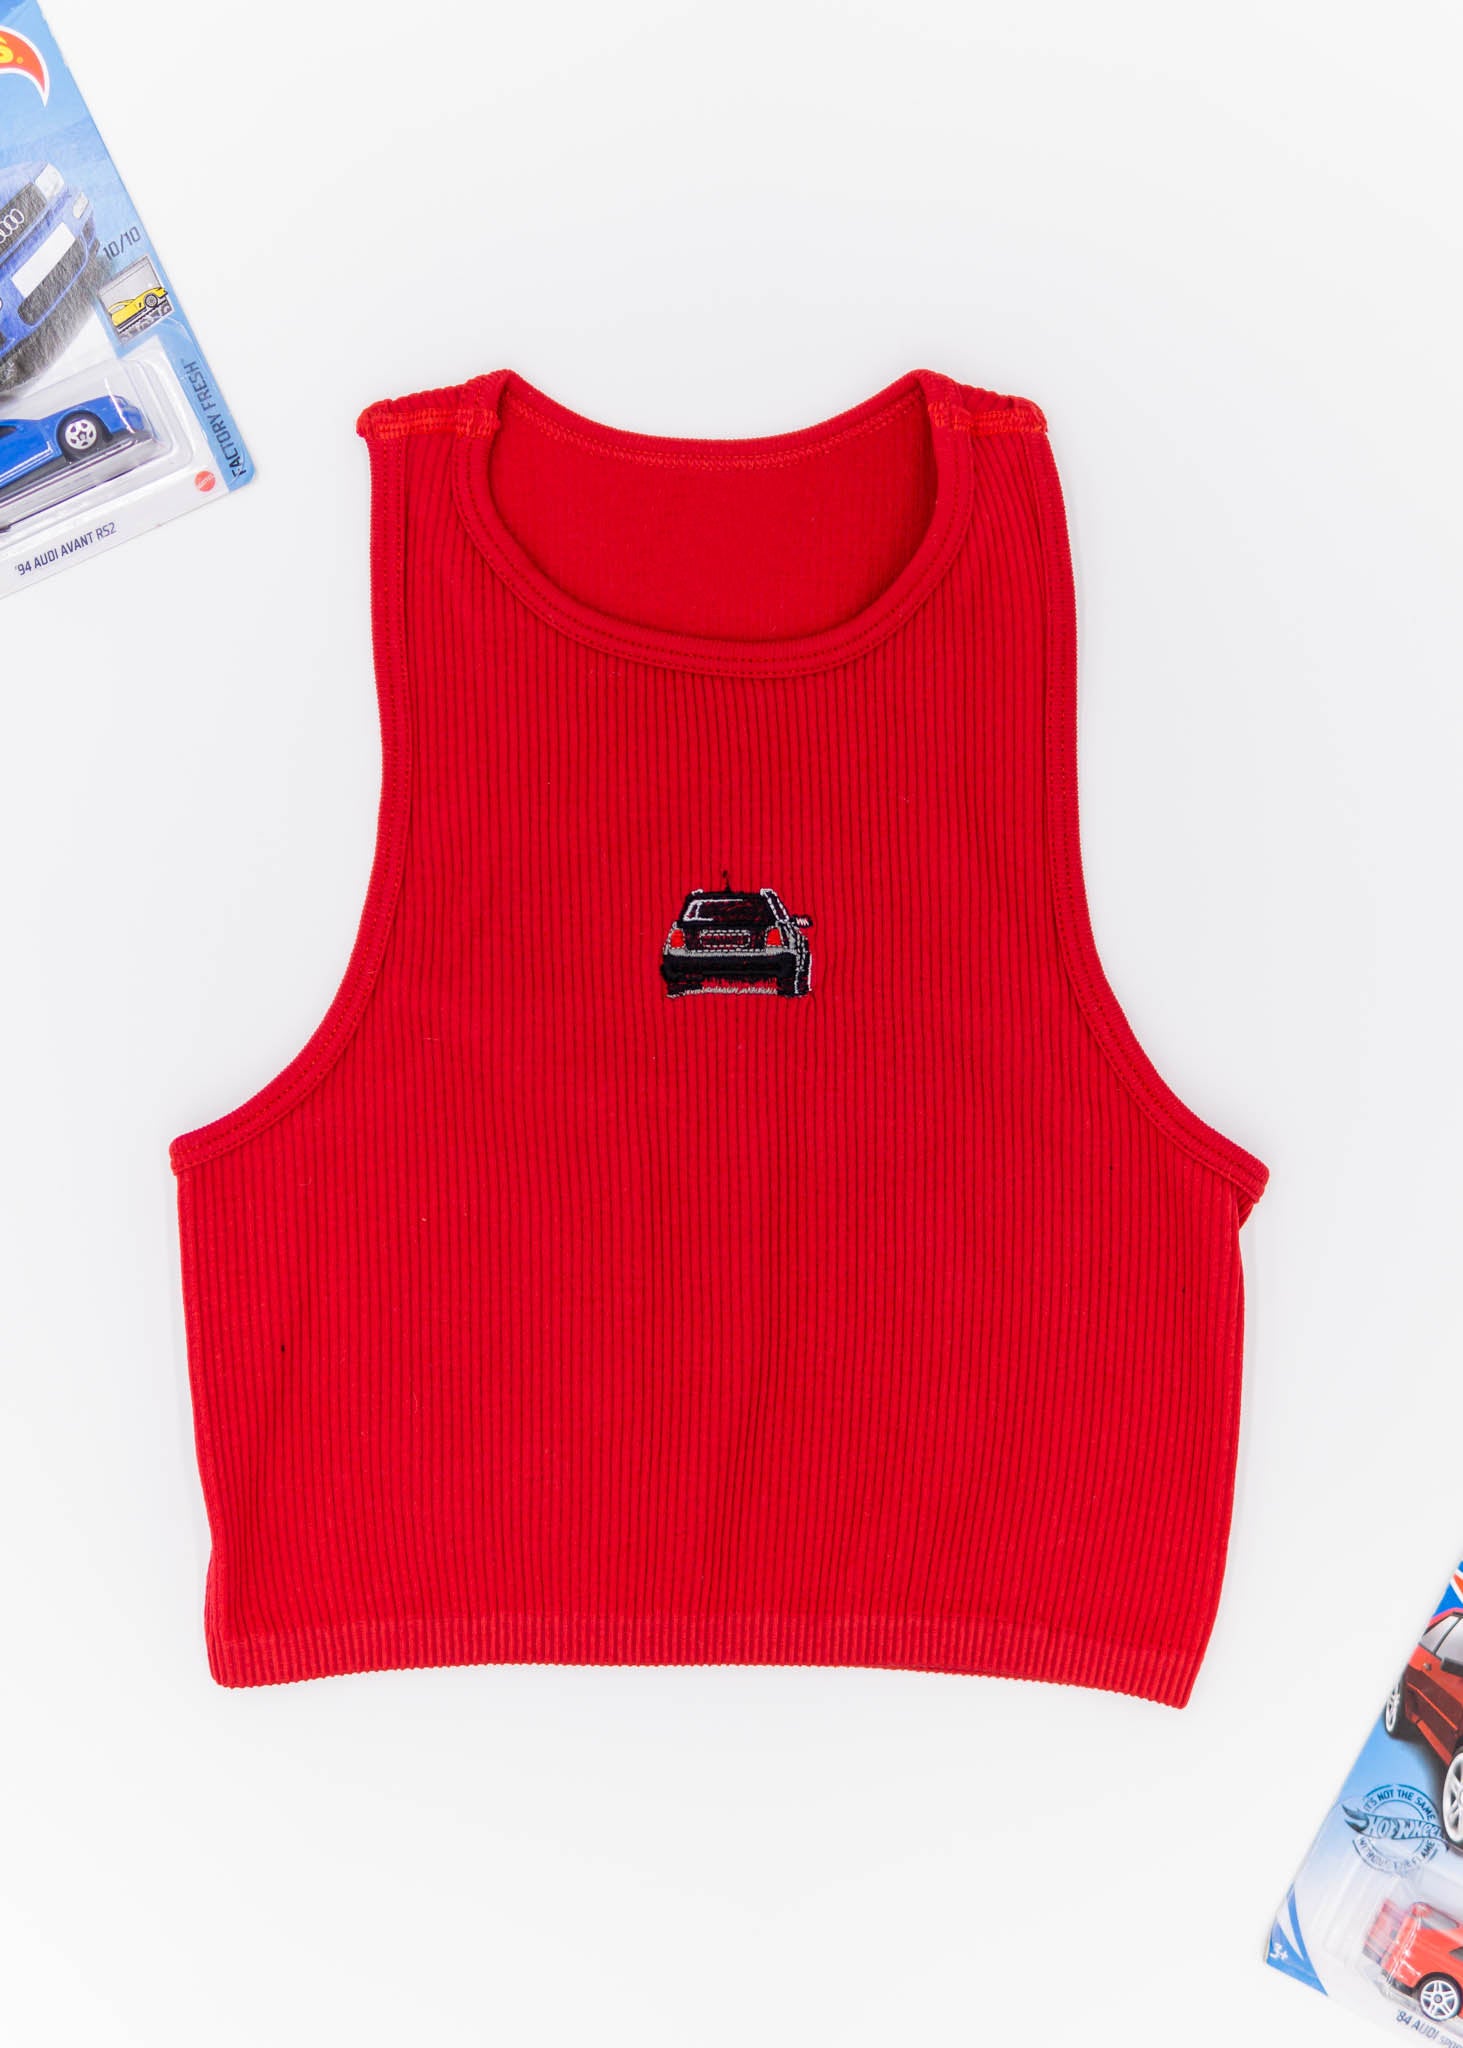 A red Audi crop top for women. Photo is a front view of the top with an embroidered black Audi B5 RS4. Fabric composition is polyester, and elastine. The material is stretchy, ribbed, and non-transparent. The style of this shirt is sleeveless, with a crewneck neckline.